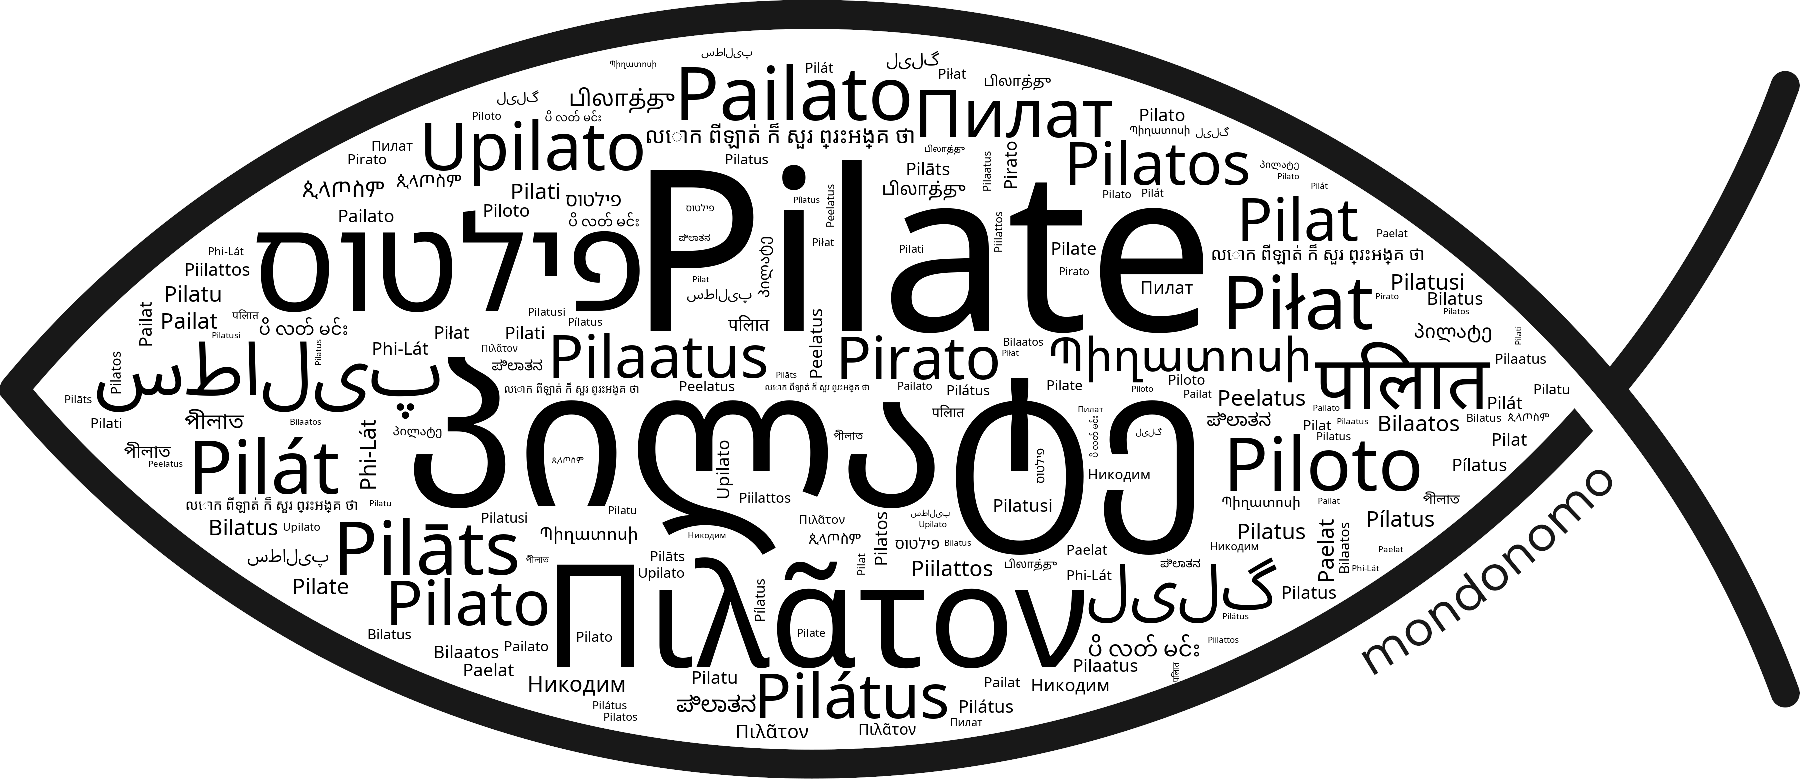 Name Pilate in the world's Bibles